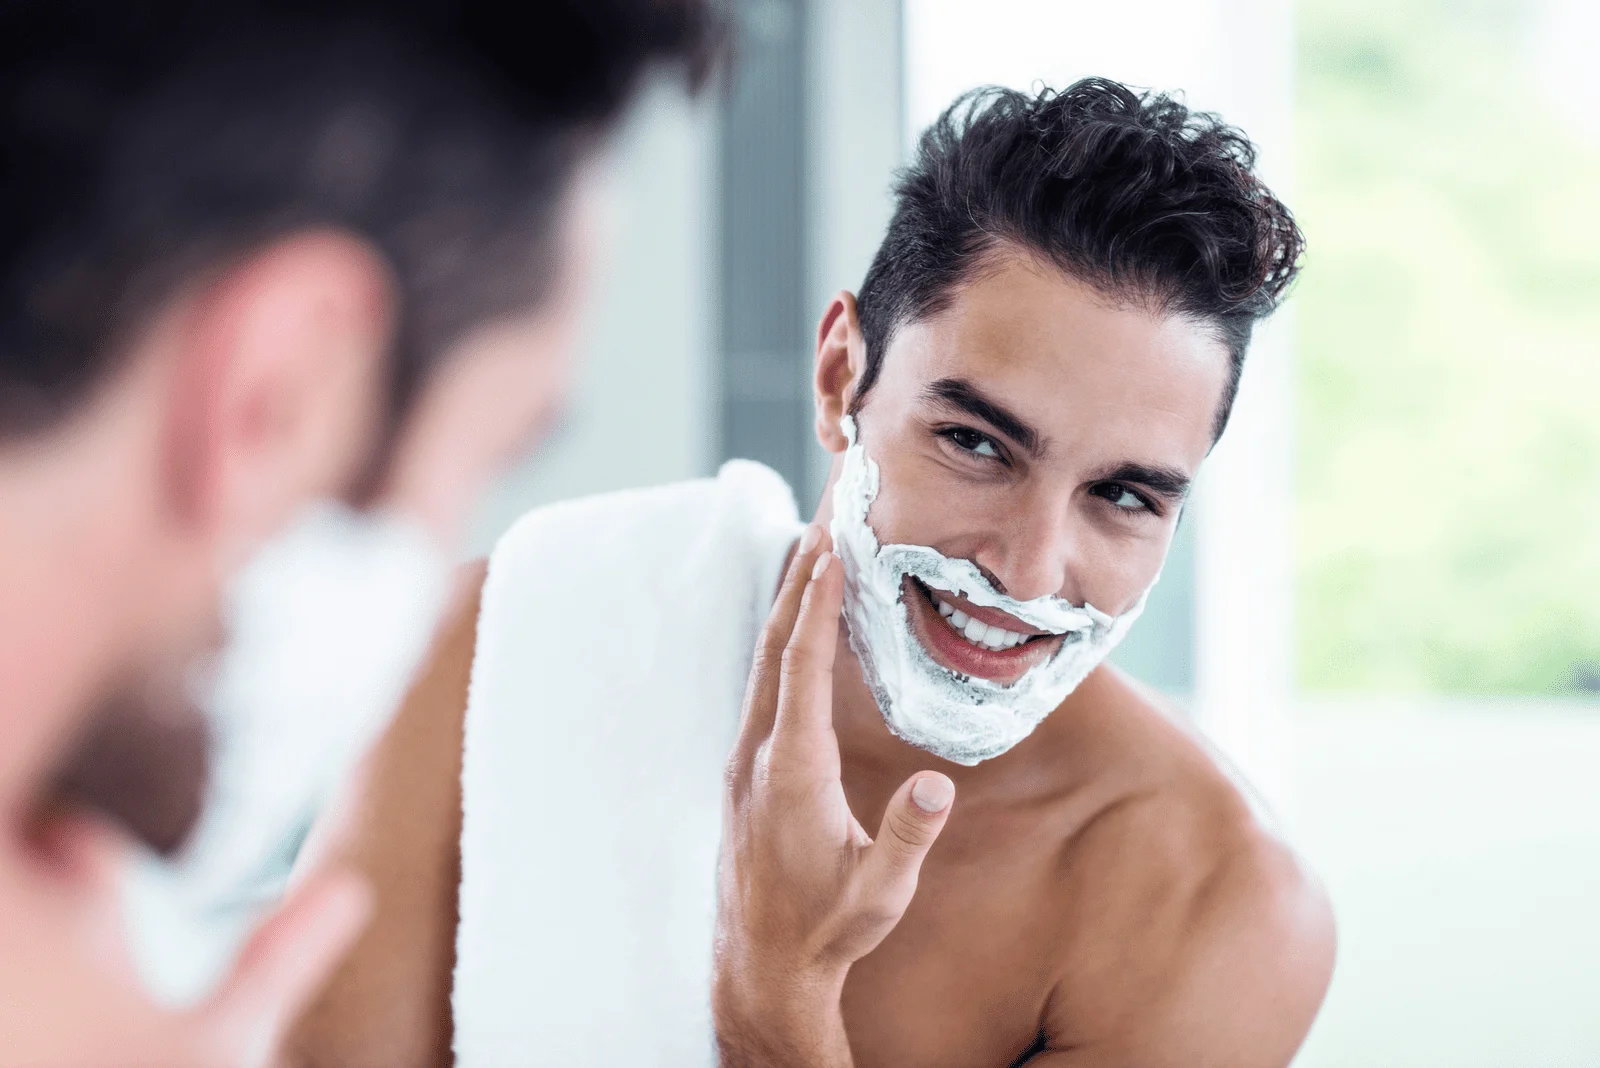 a smiling man stands in front of a mirror and shaves